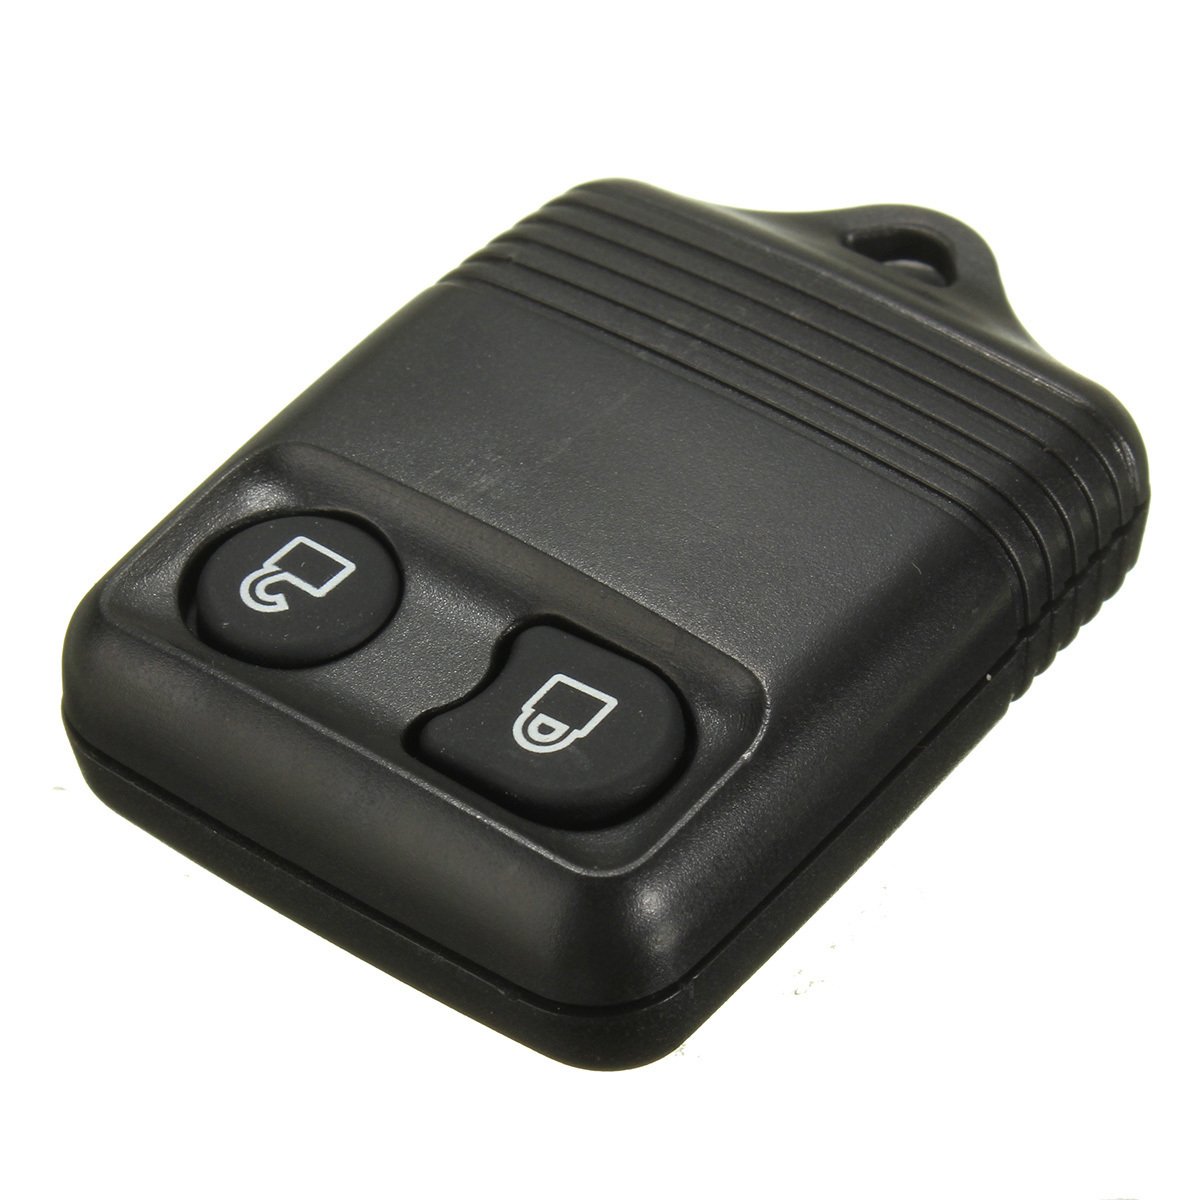 2 Buttons Remote Key Replacement Shell Case For Ford Explorer Escape 2